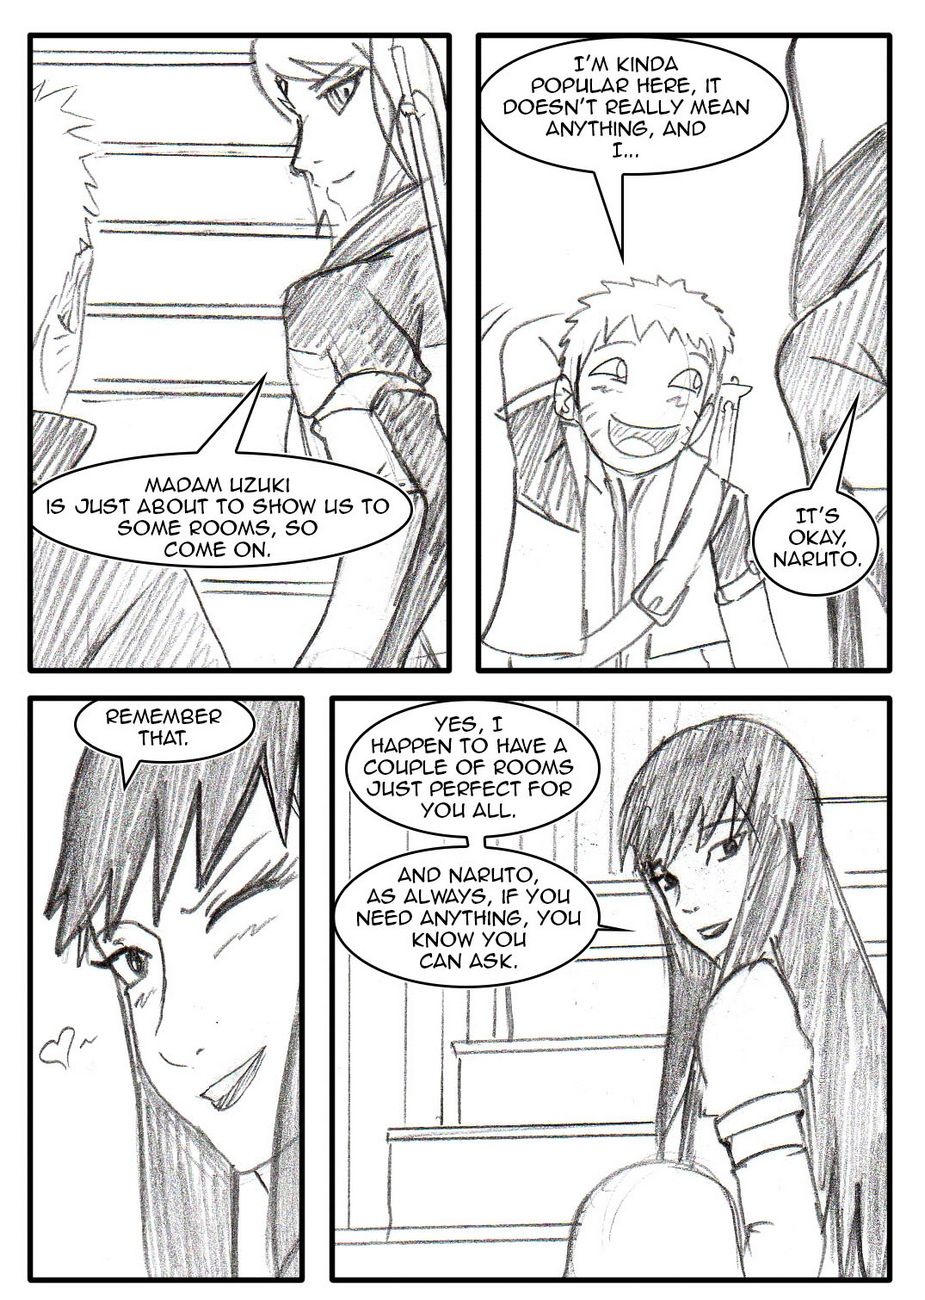 Naruto-Quest 14 - A Moment Of Rest page 14